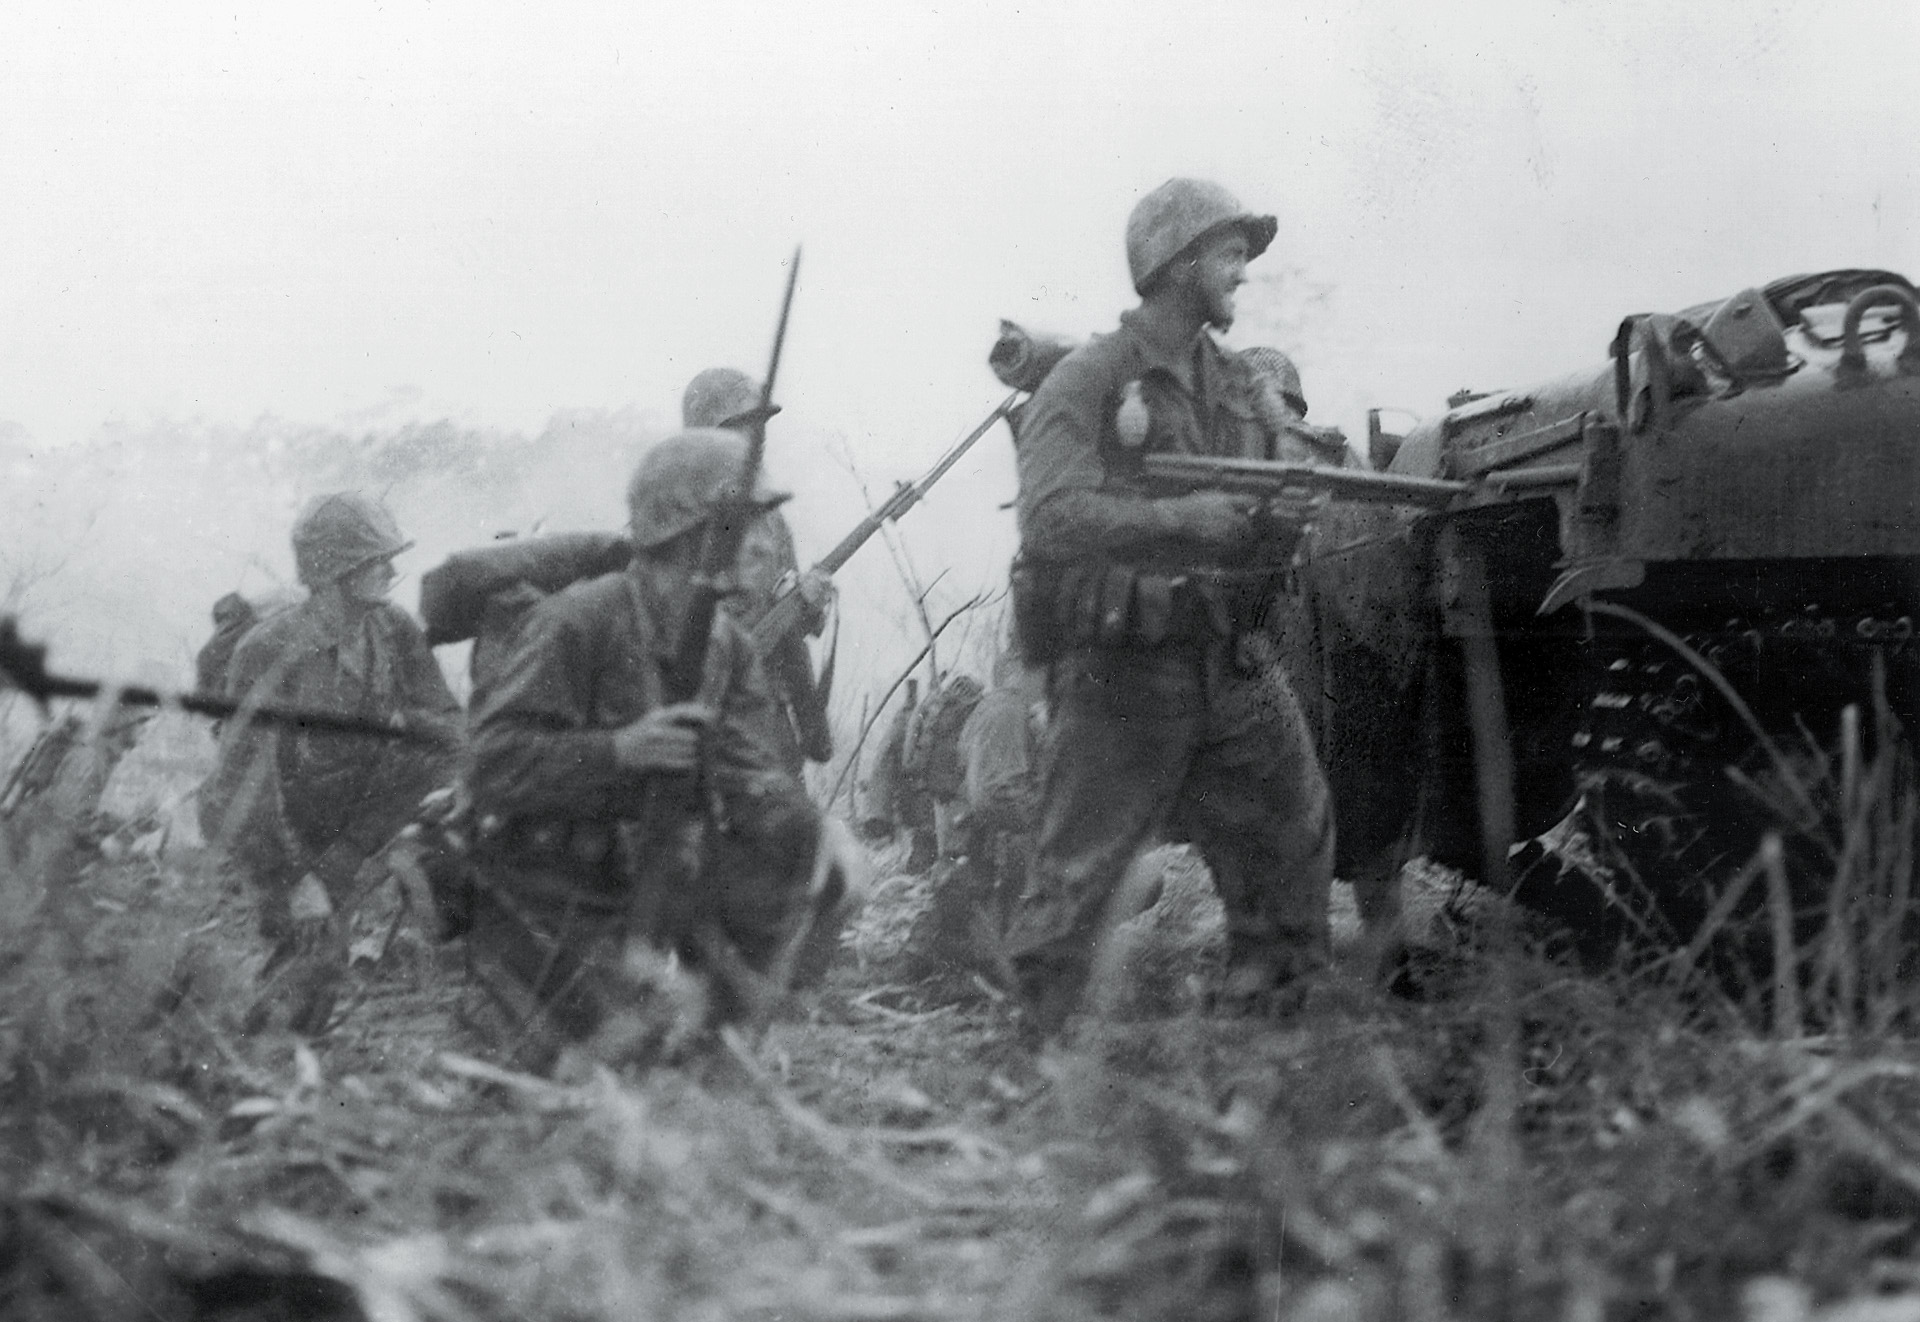 Weapons at the ready, a group of Marines is covered by a tank during an advance in the jungle near Cape Gloucester.